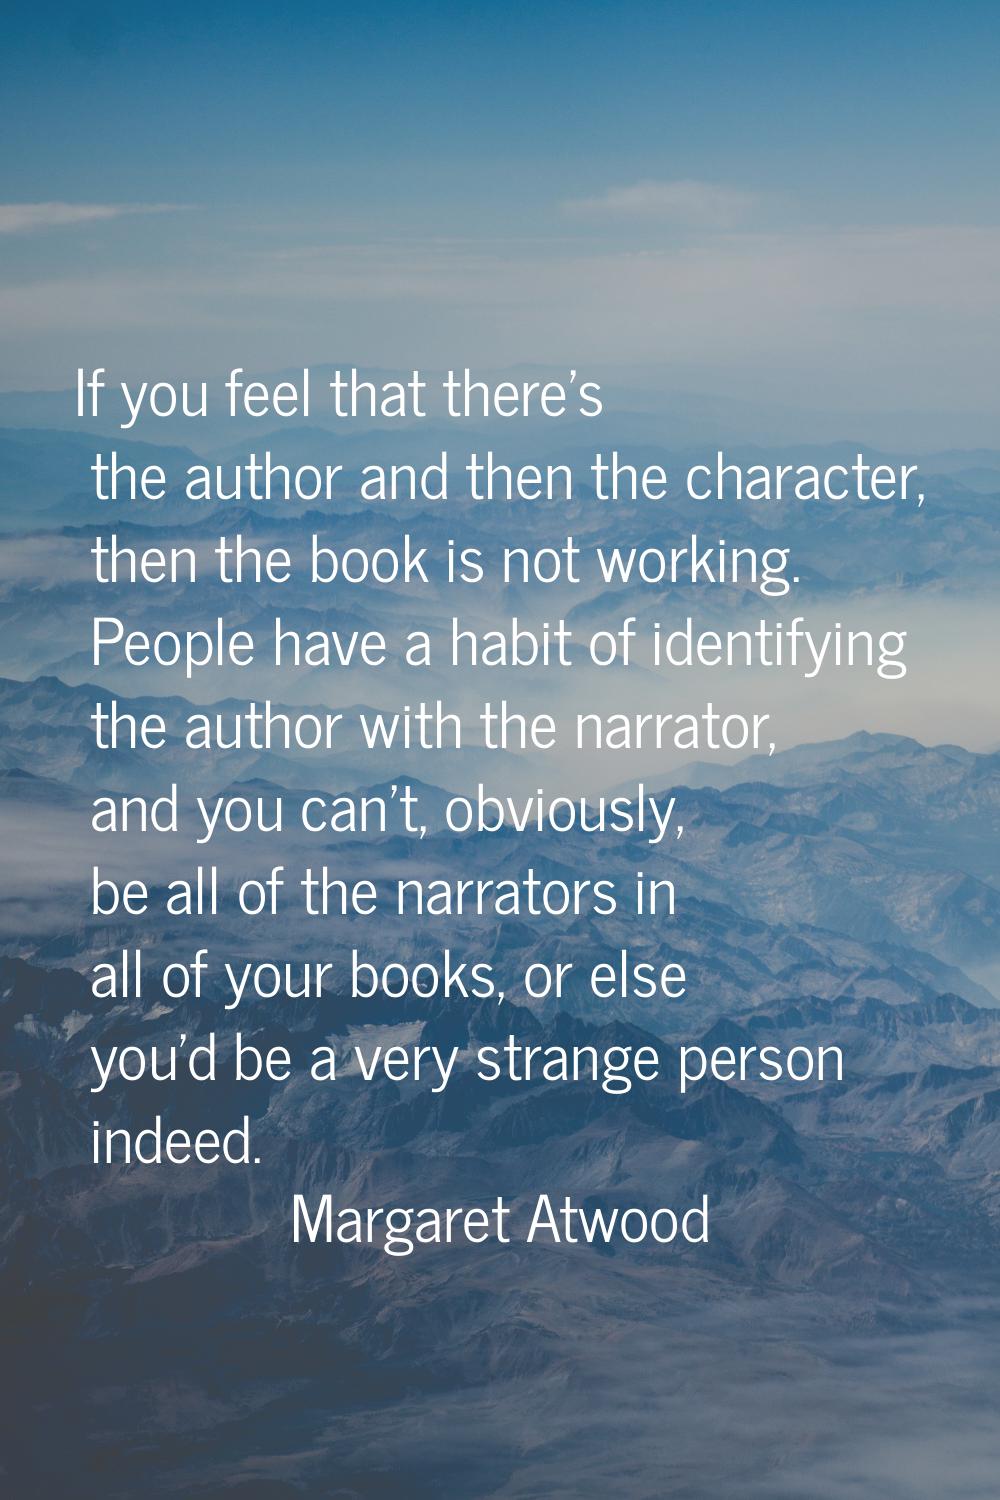 If you feel that there's the author and then the character, then the book is not working. People ha